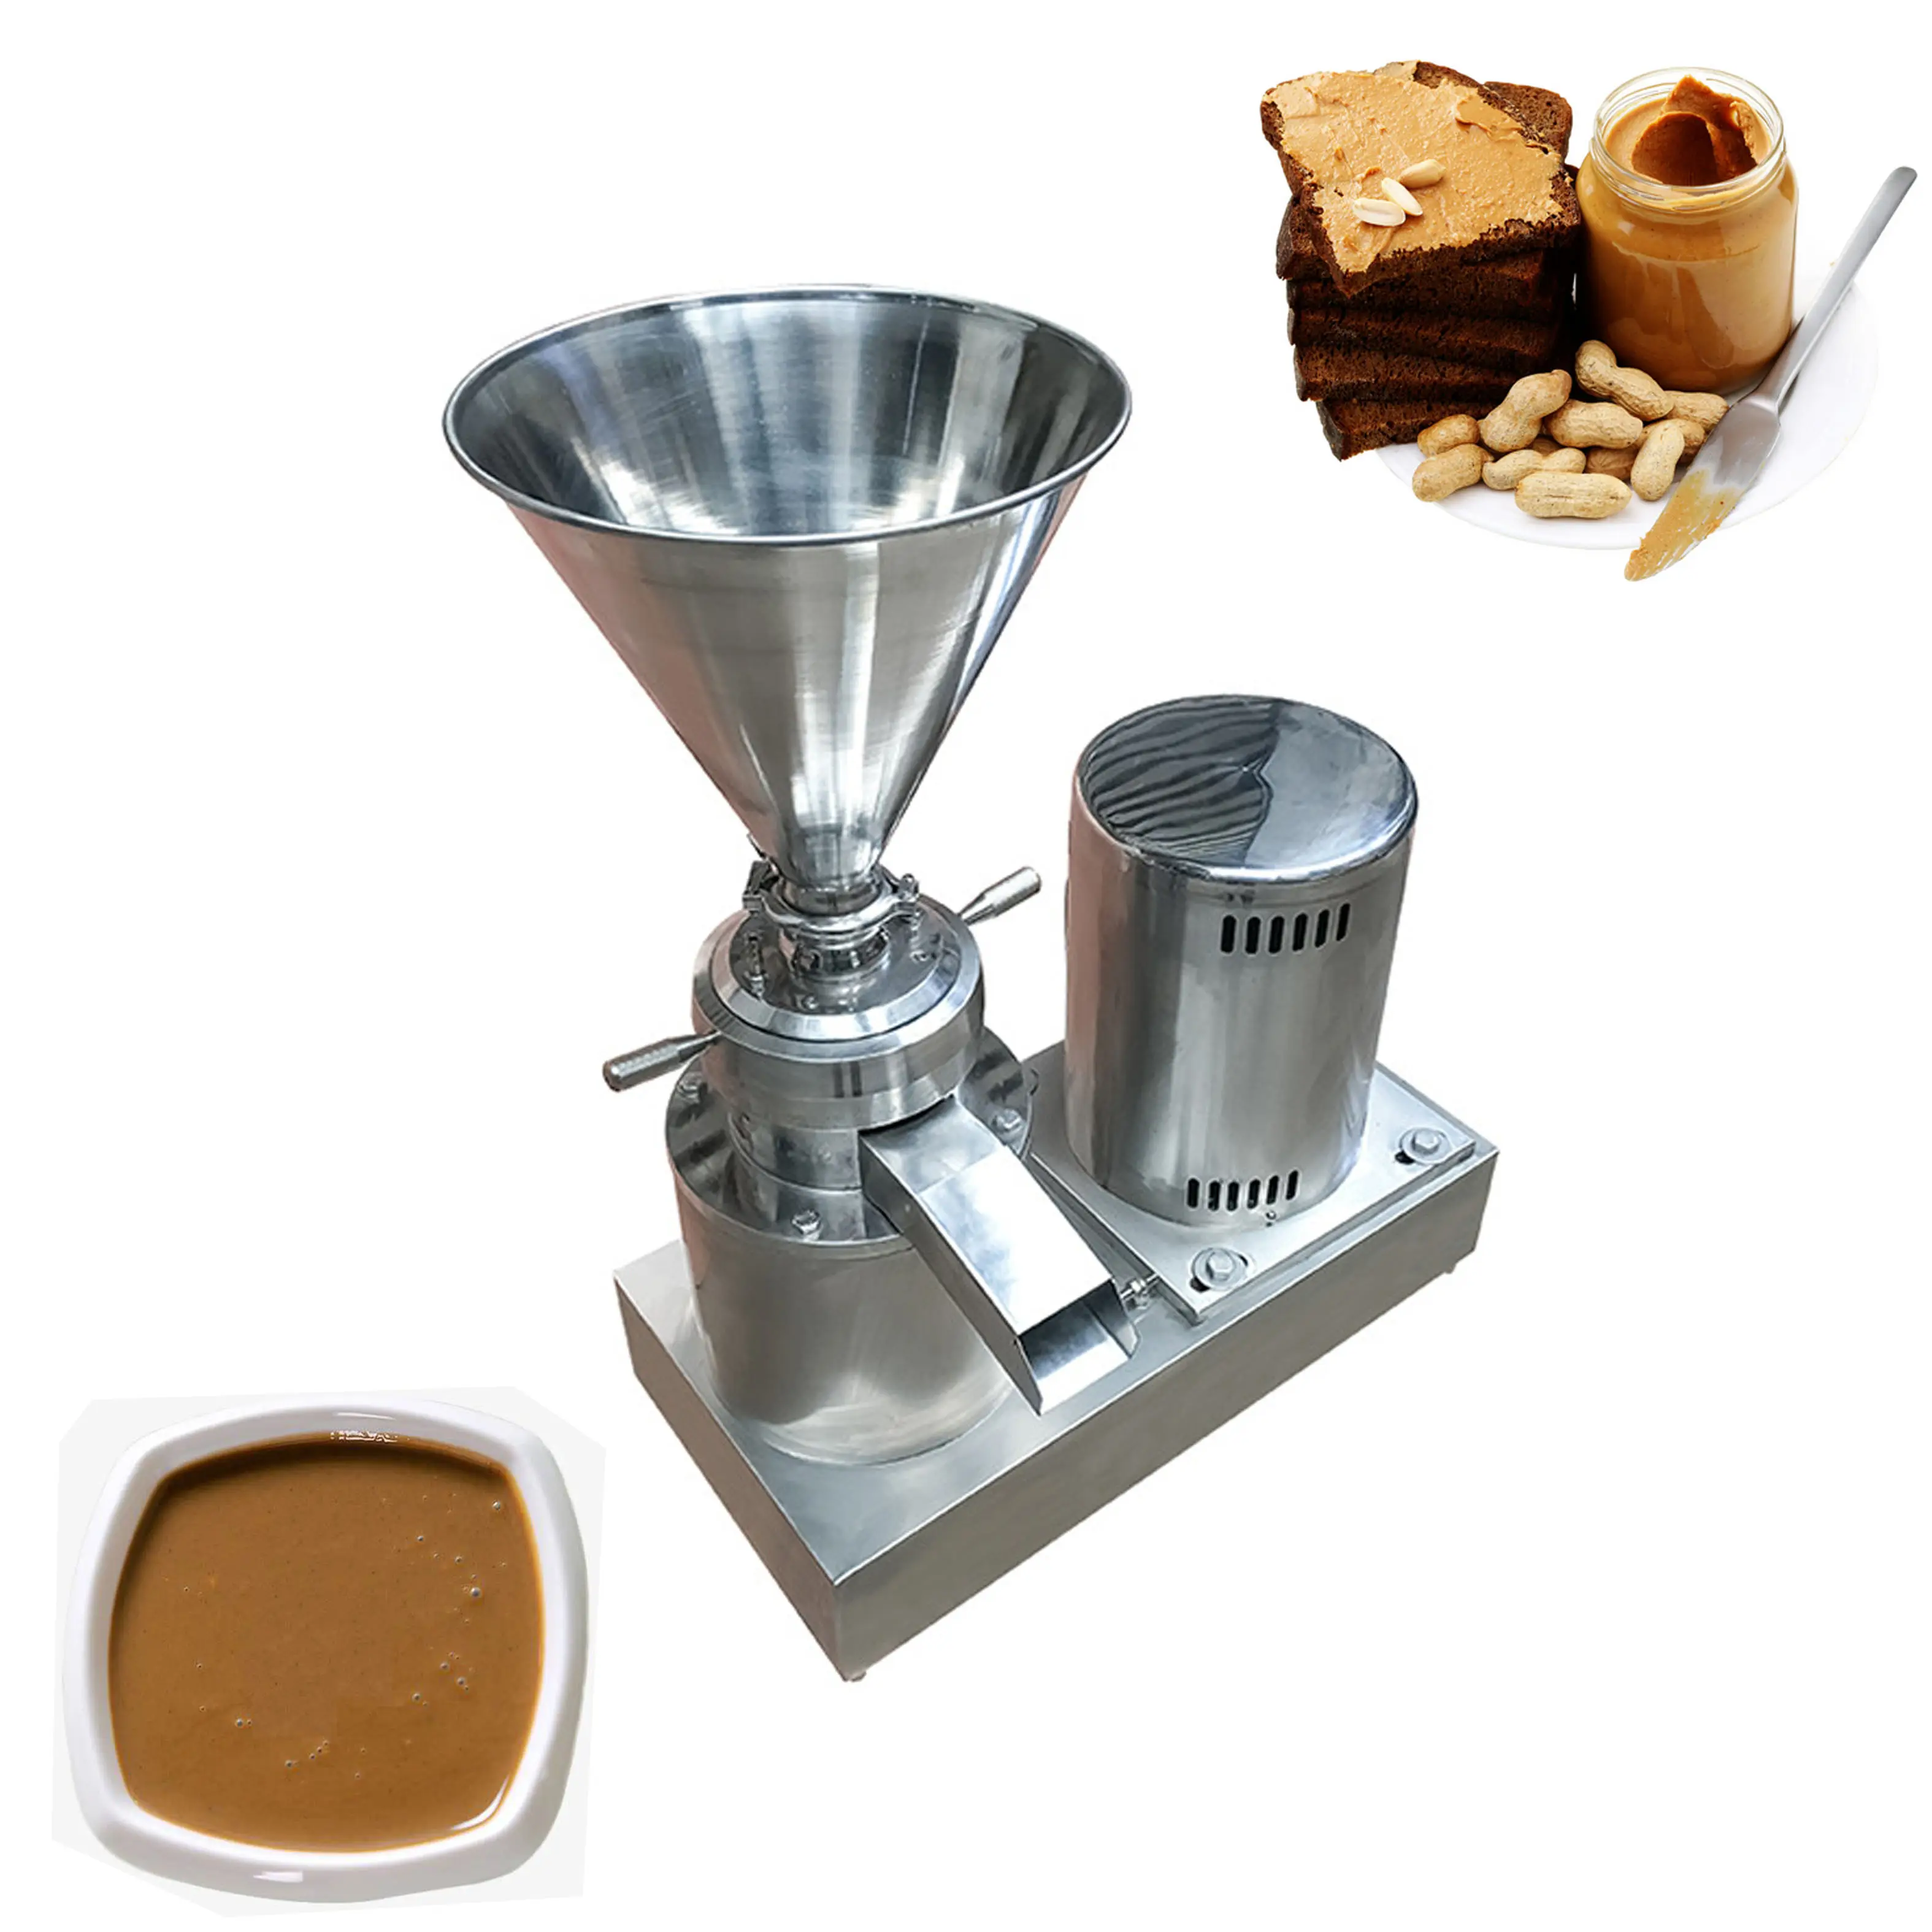 Stainless Steel Peanut Butter Pistachio Production Bean Paste Making Date Grinding Machine with CE certificate